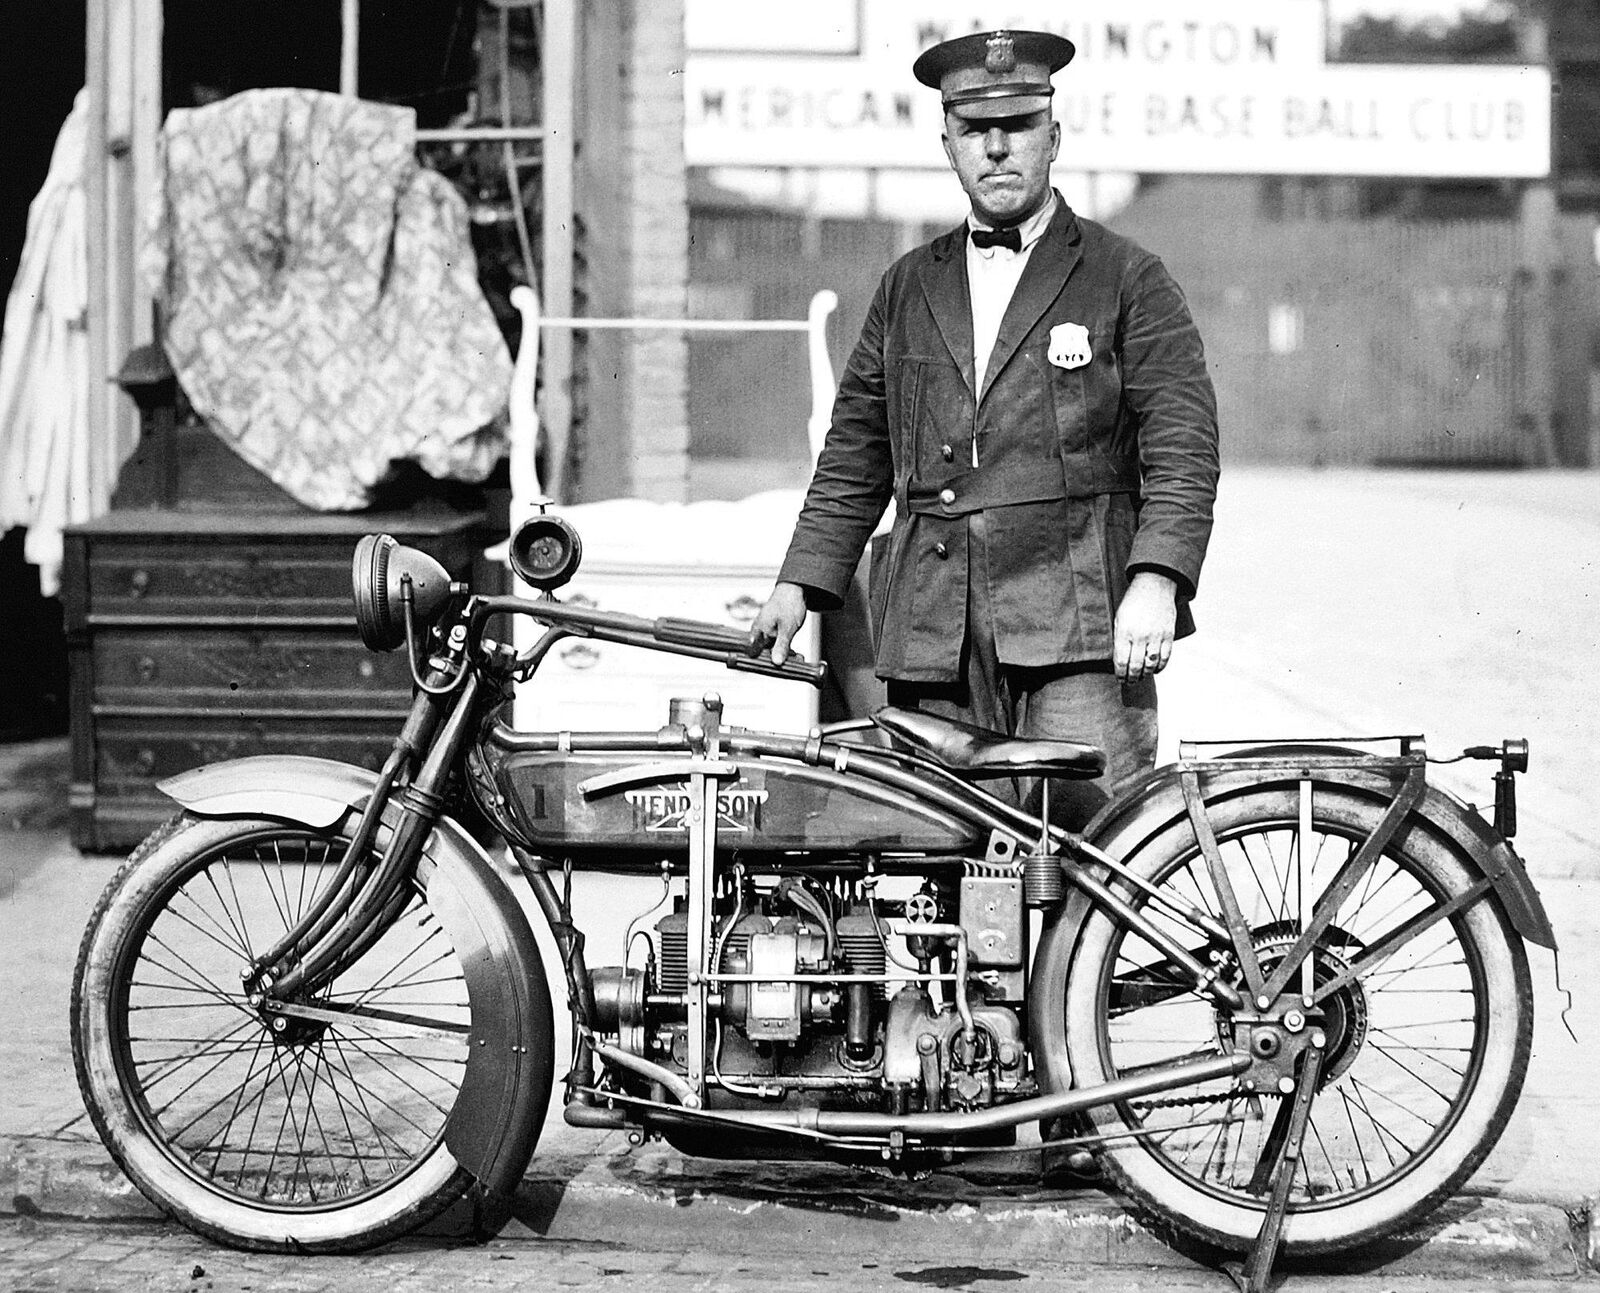 1922 POLICE MAN & His WILLIAMS & HENDERSON MOTORCYCLE 8.5X11 Photo